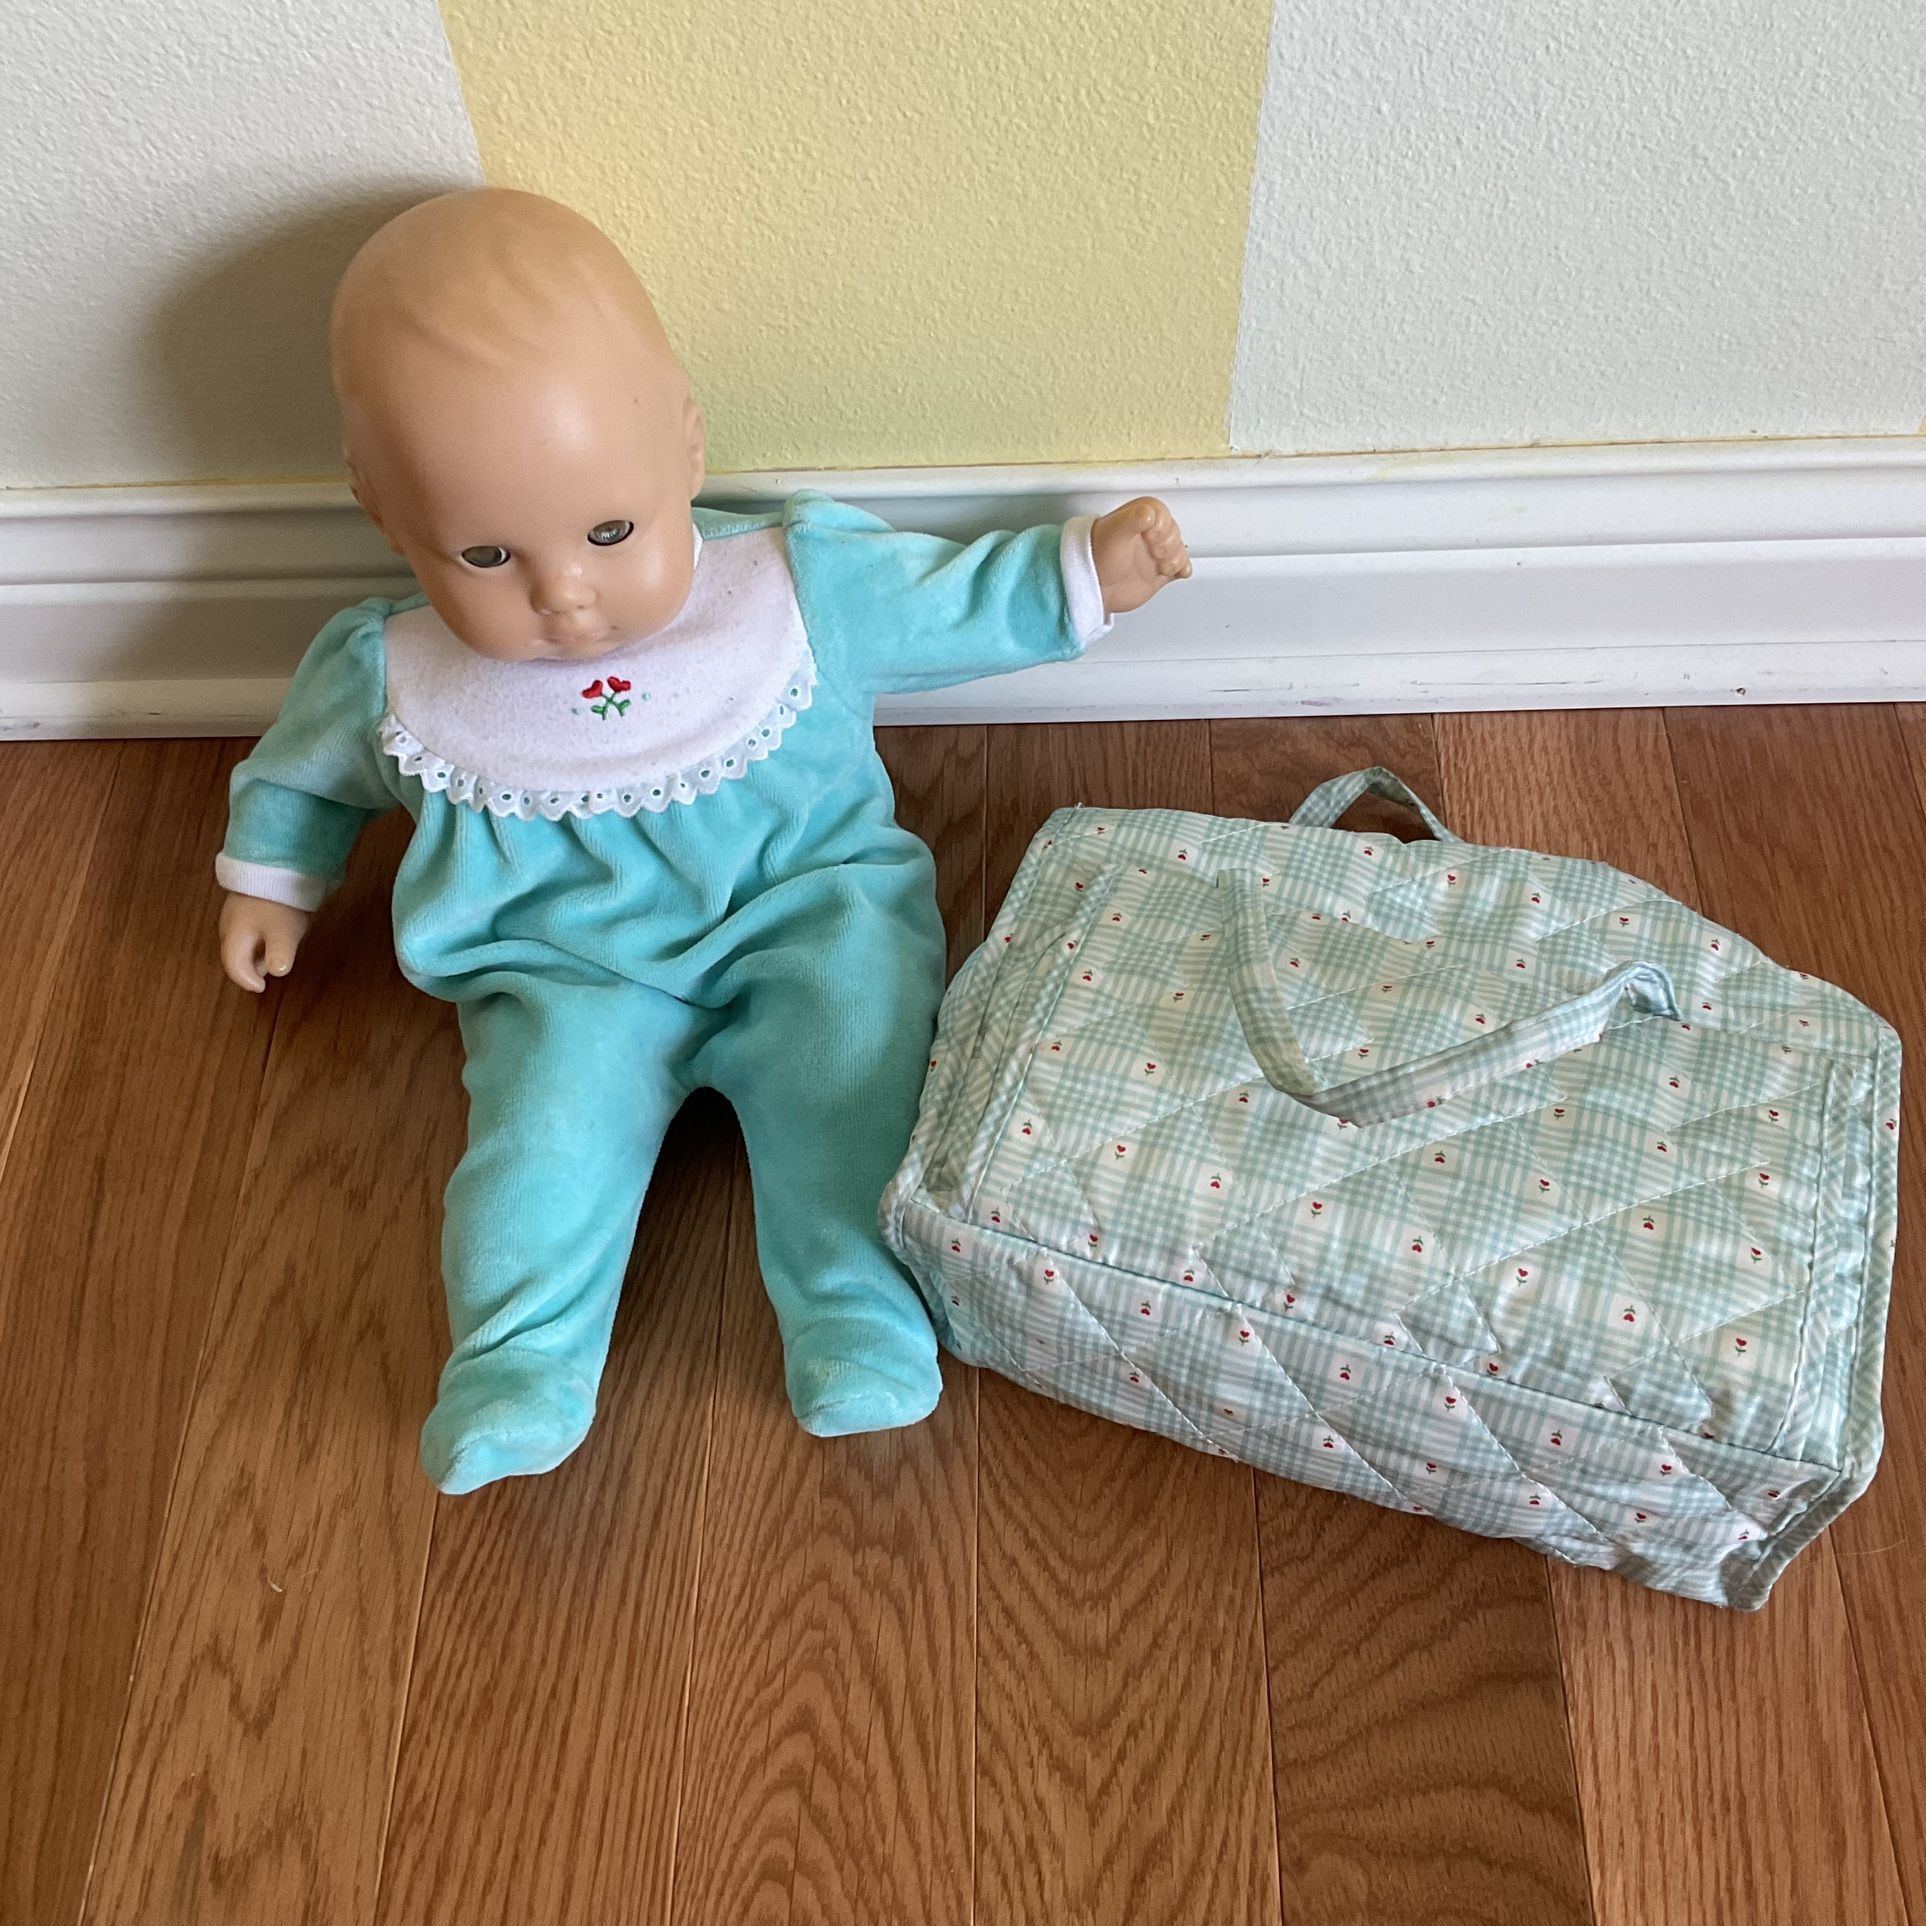 American Girl Bitty Baby Doll & Accessories